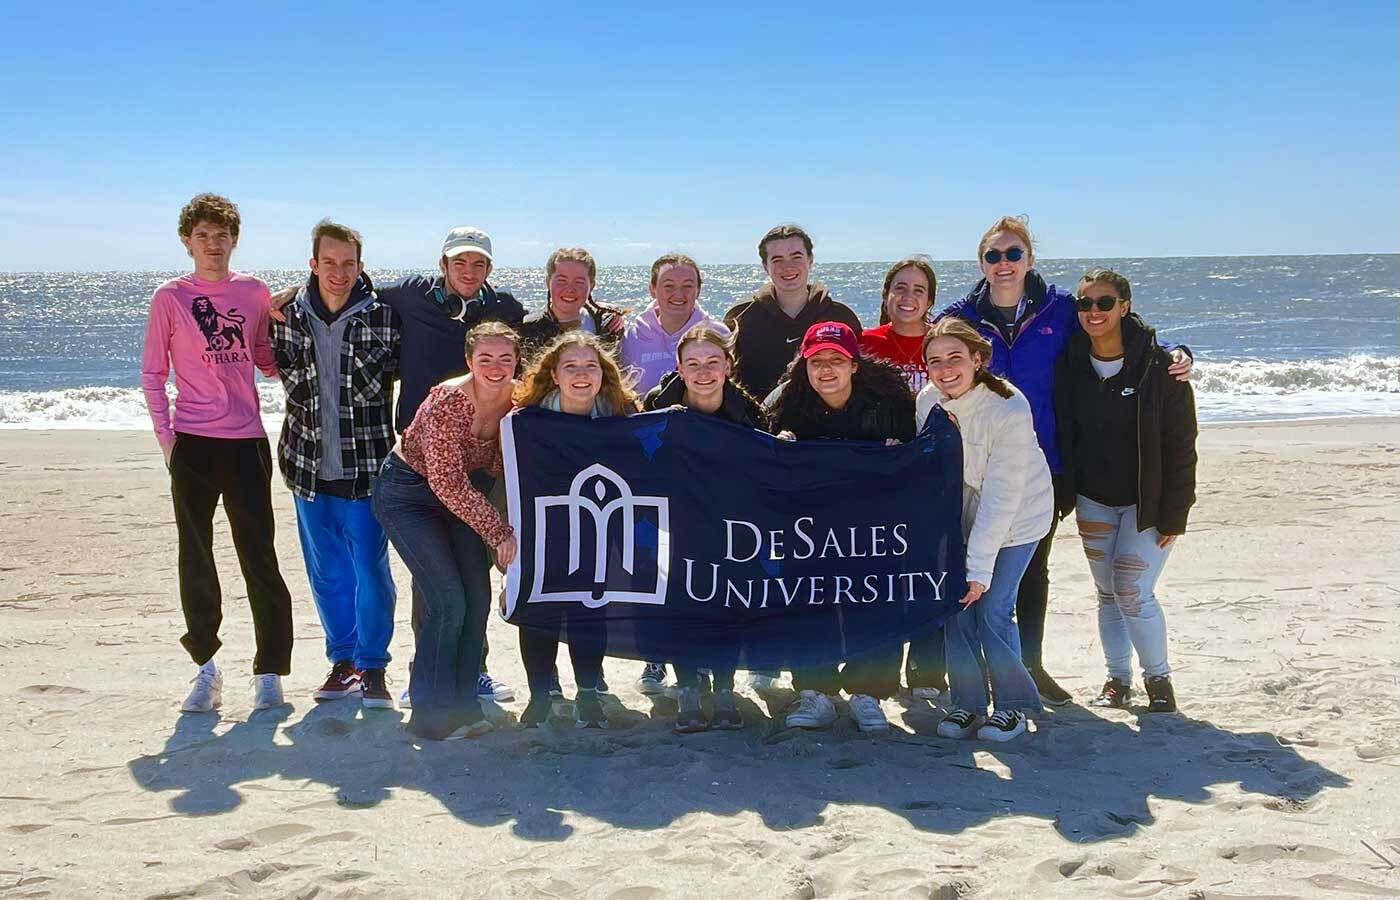 Students on beach holding DeSales flag during First-Year Leadership Summit